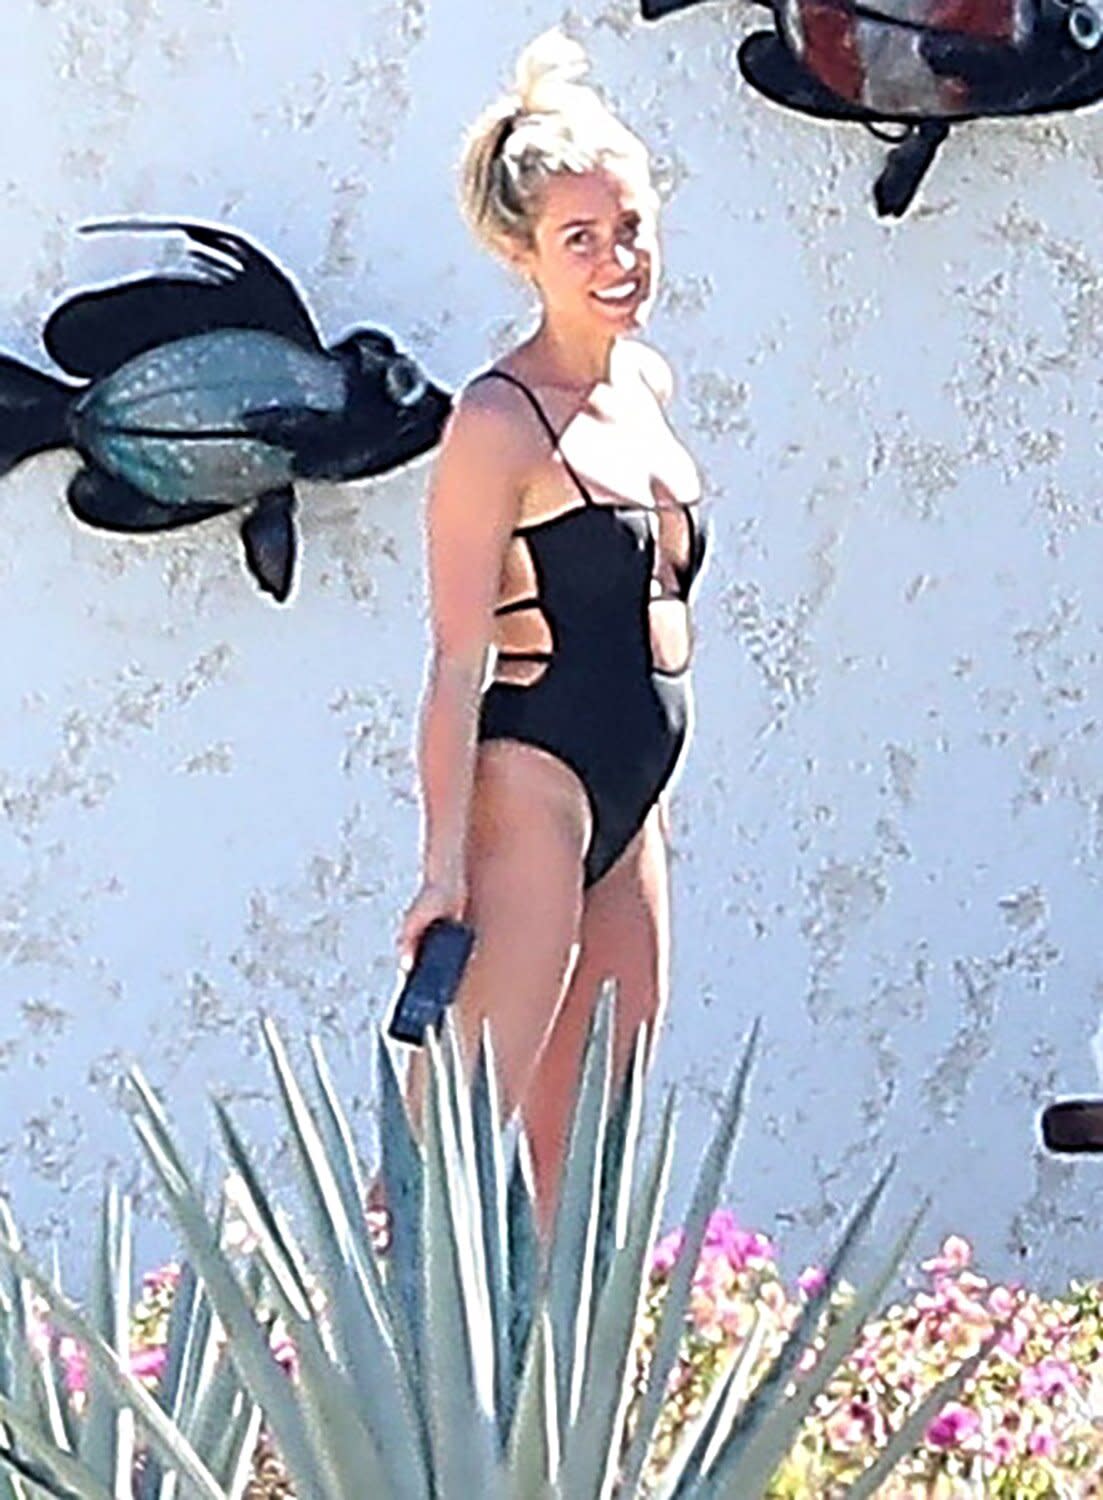 Kristin Cavallari relaxed in a black swimsuit during a getaway in Cabo San Lucas